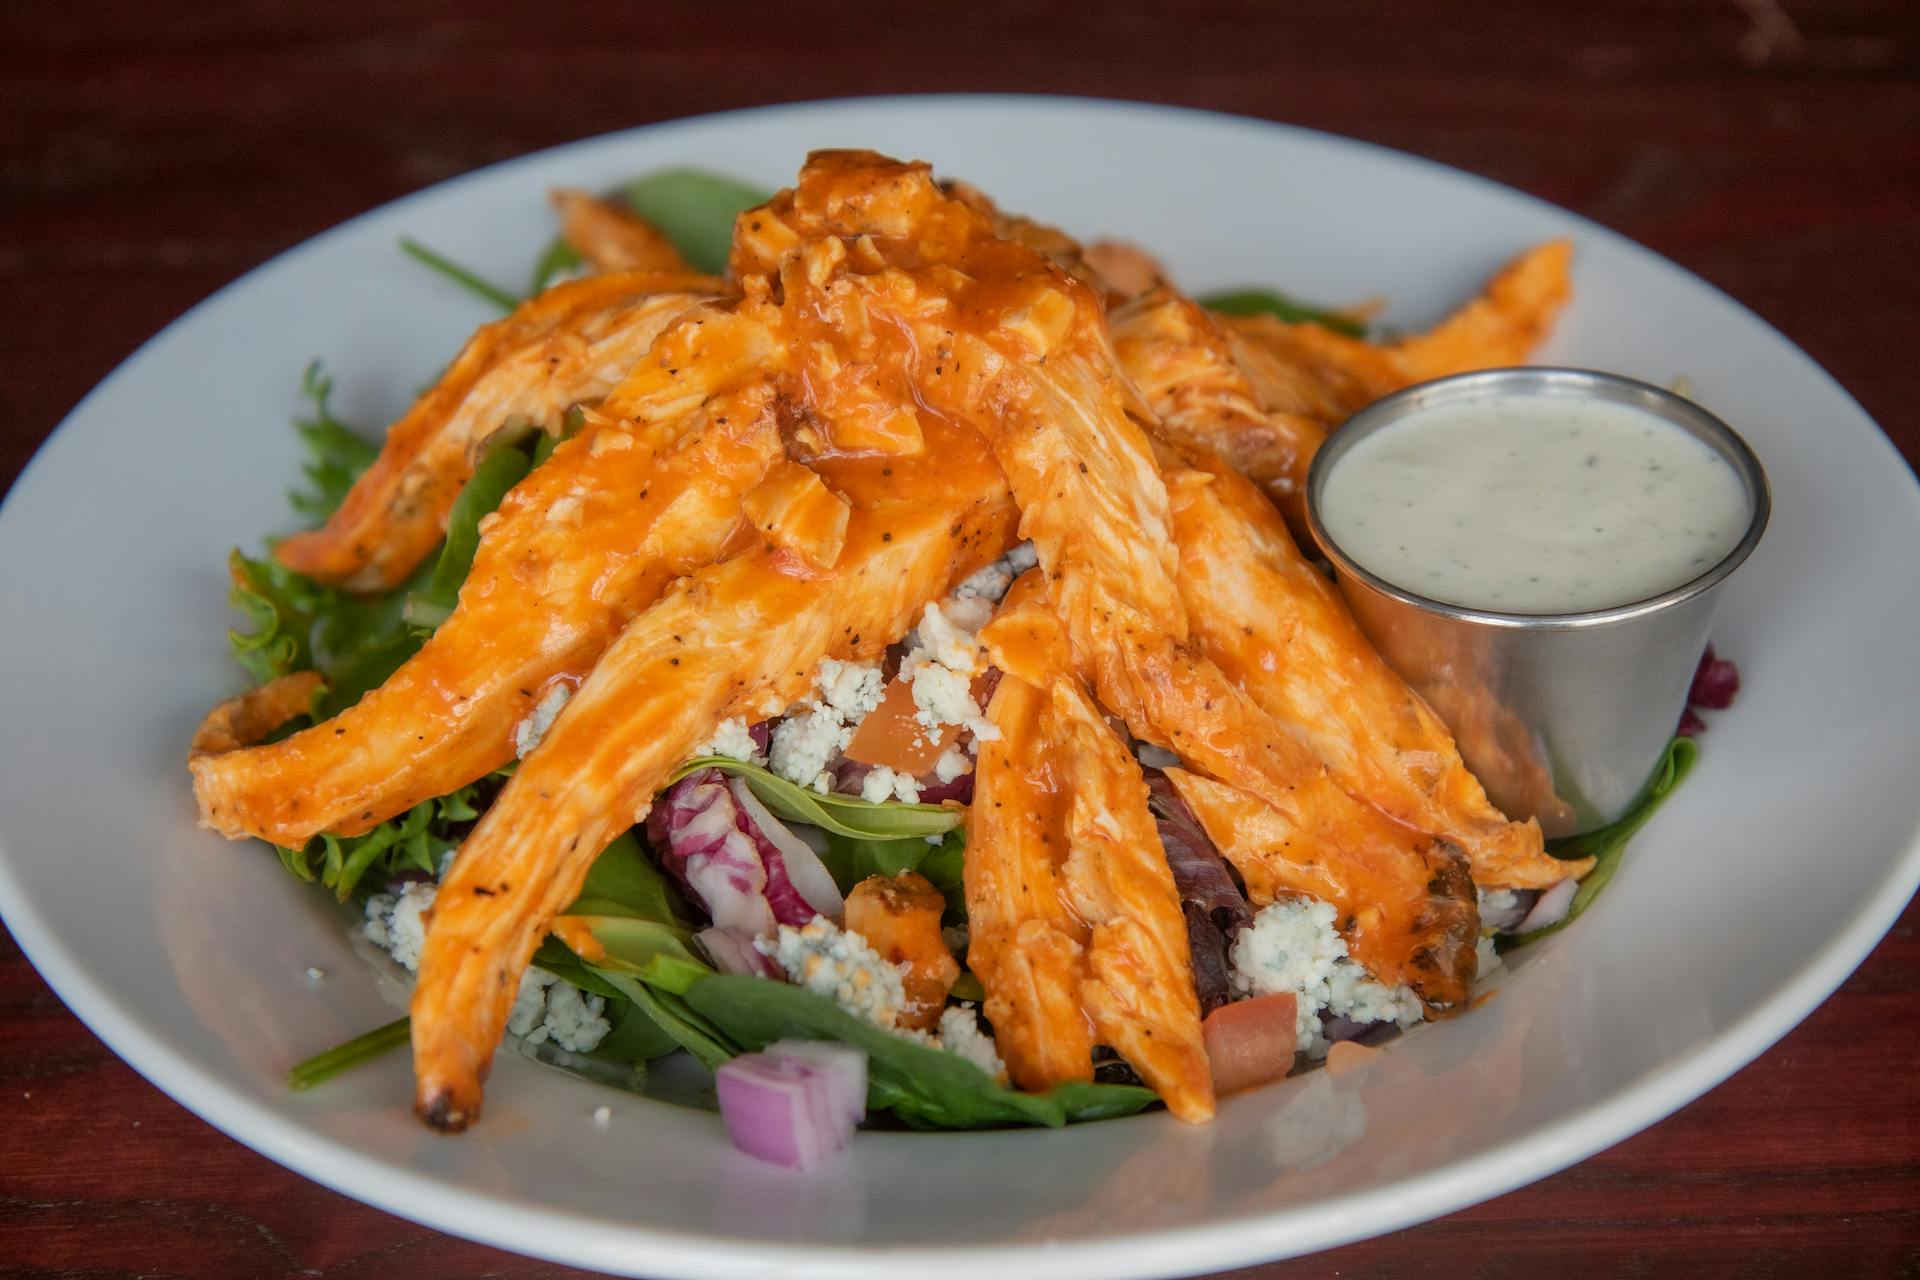 Buffalo Chicken Salad from Firehouse Grill - Chicago Ave in Evanston, IL